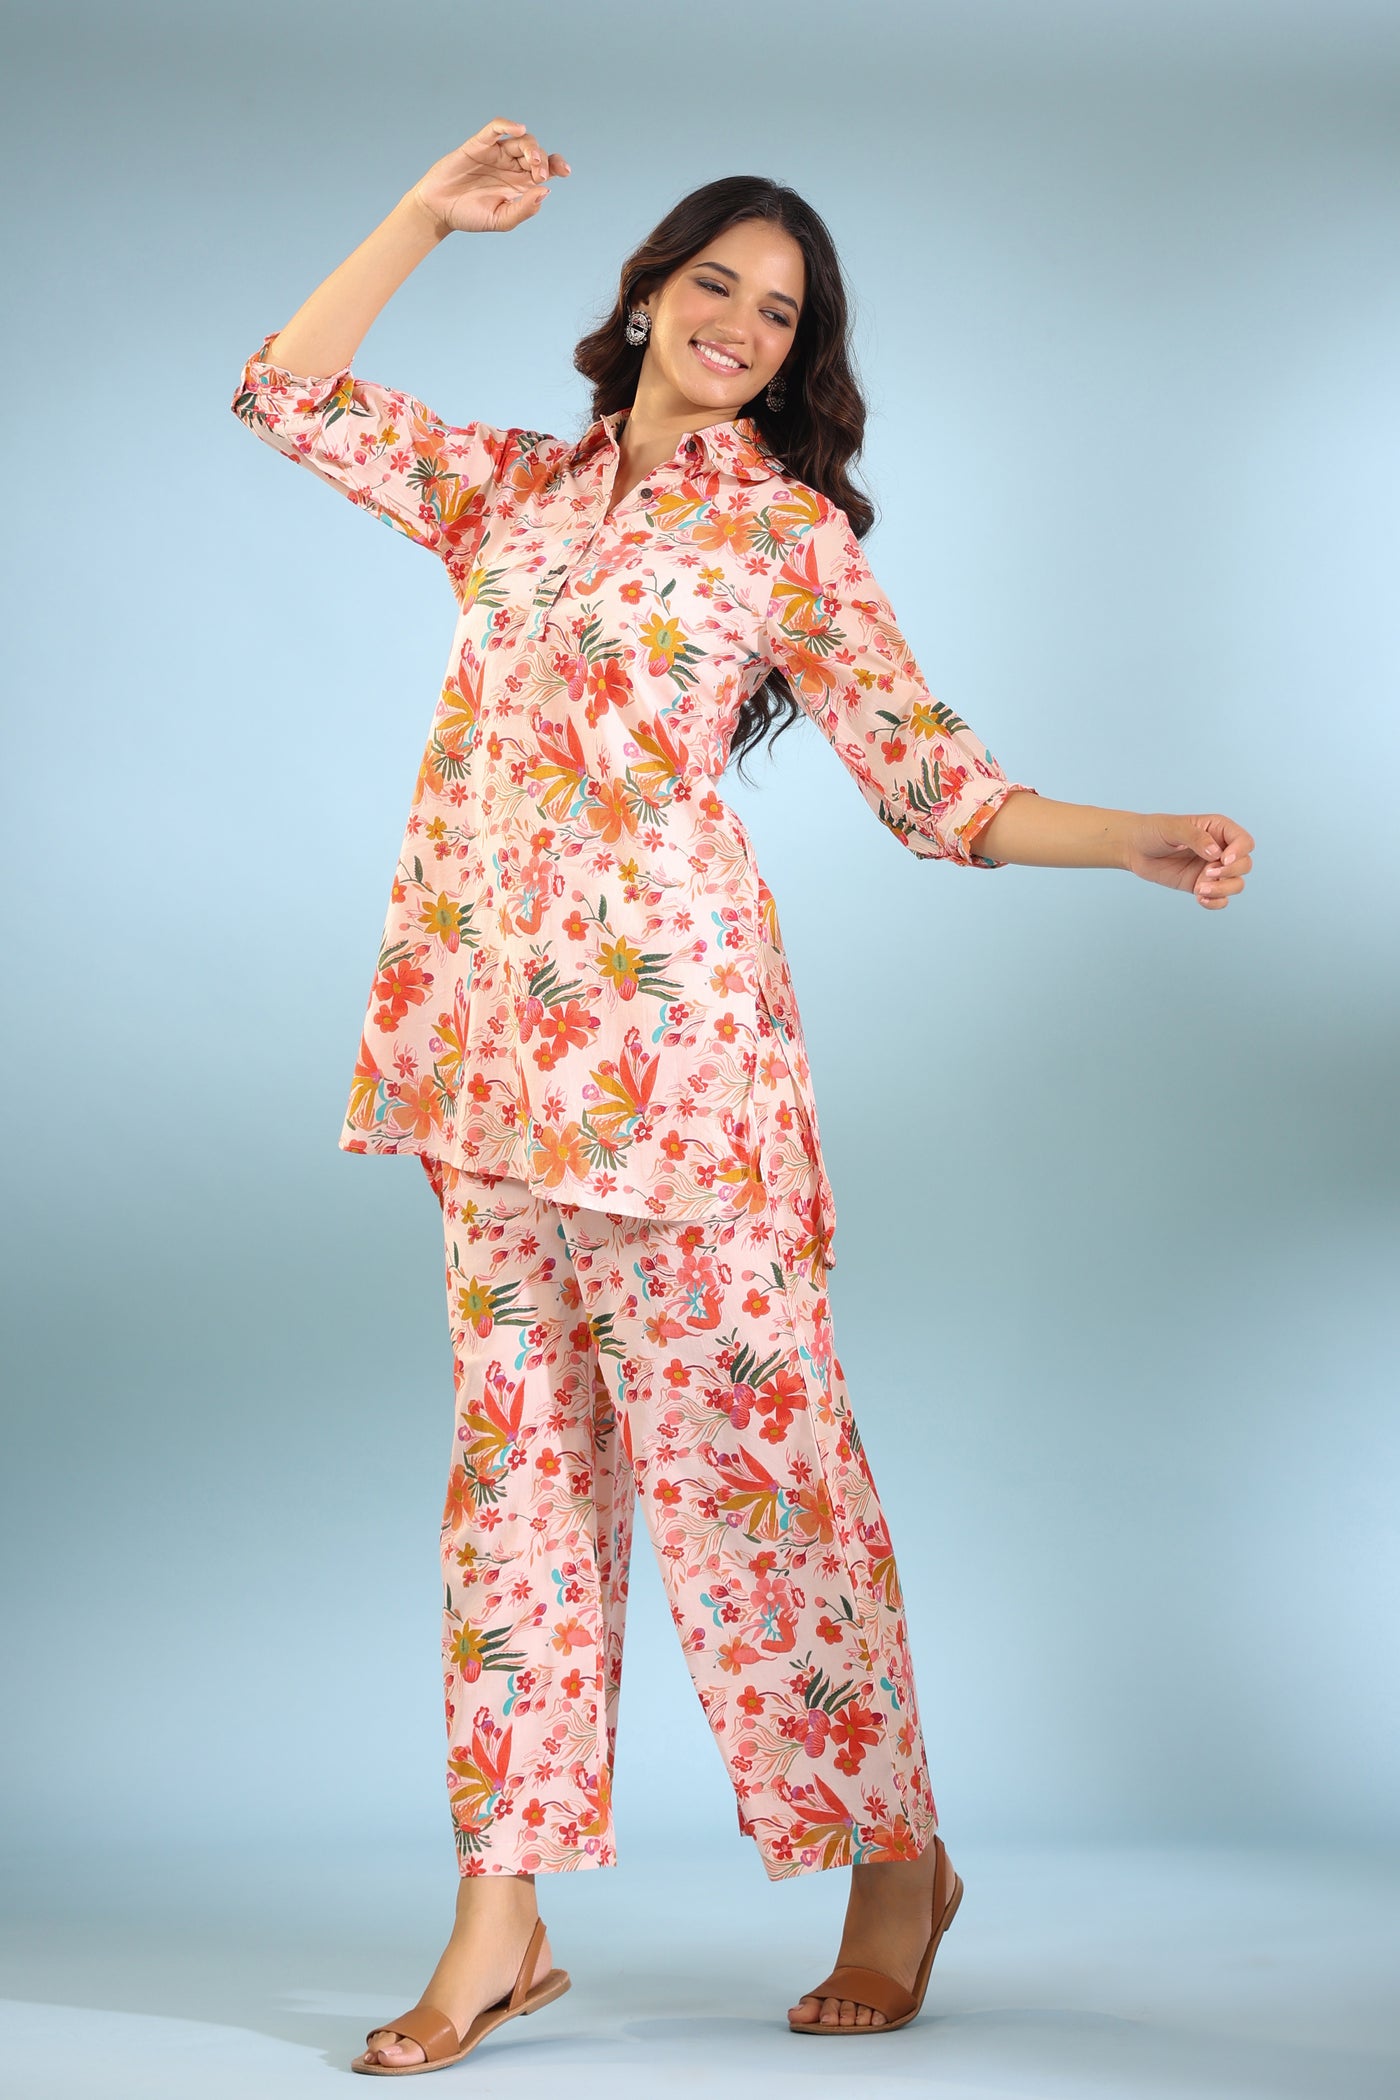 Bouquet on Collared Cotton Loungewear Set